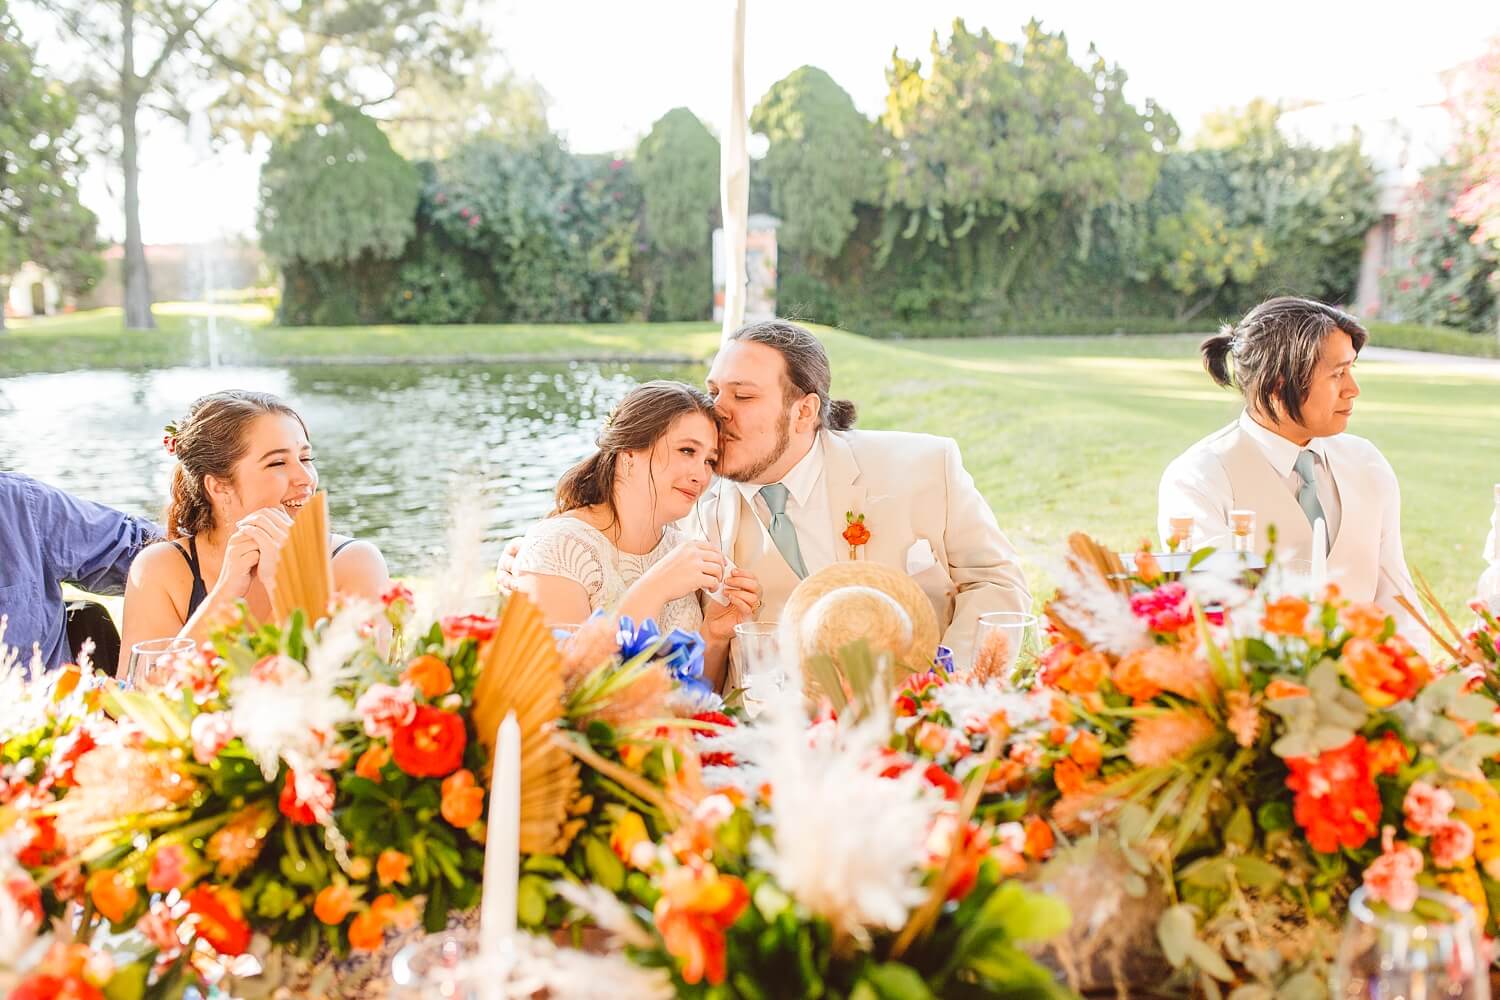 Groom kissing bride on the forehead at Mexico destination wedding | Brooke Michelle Photo